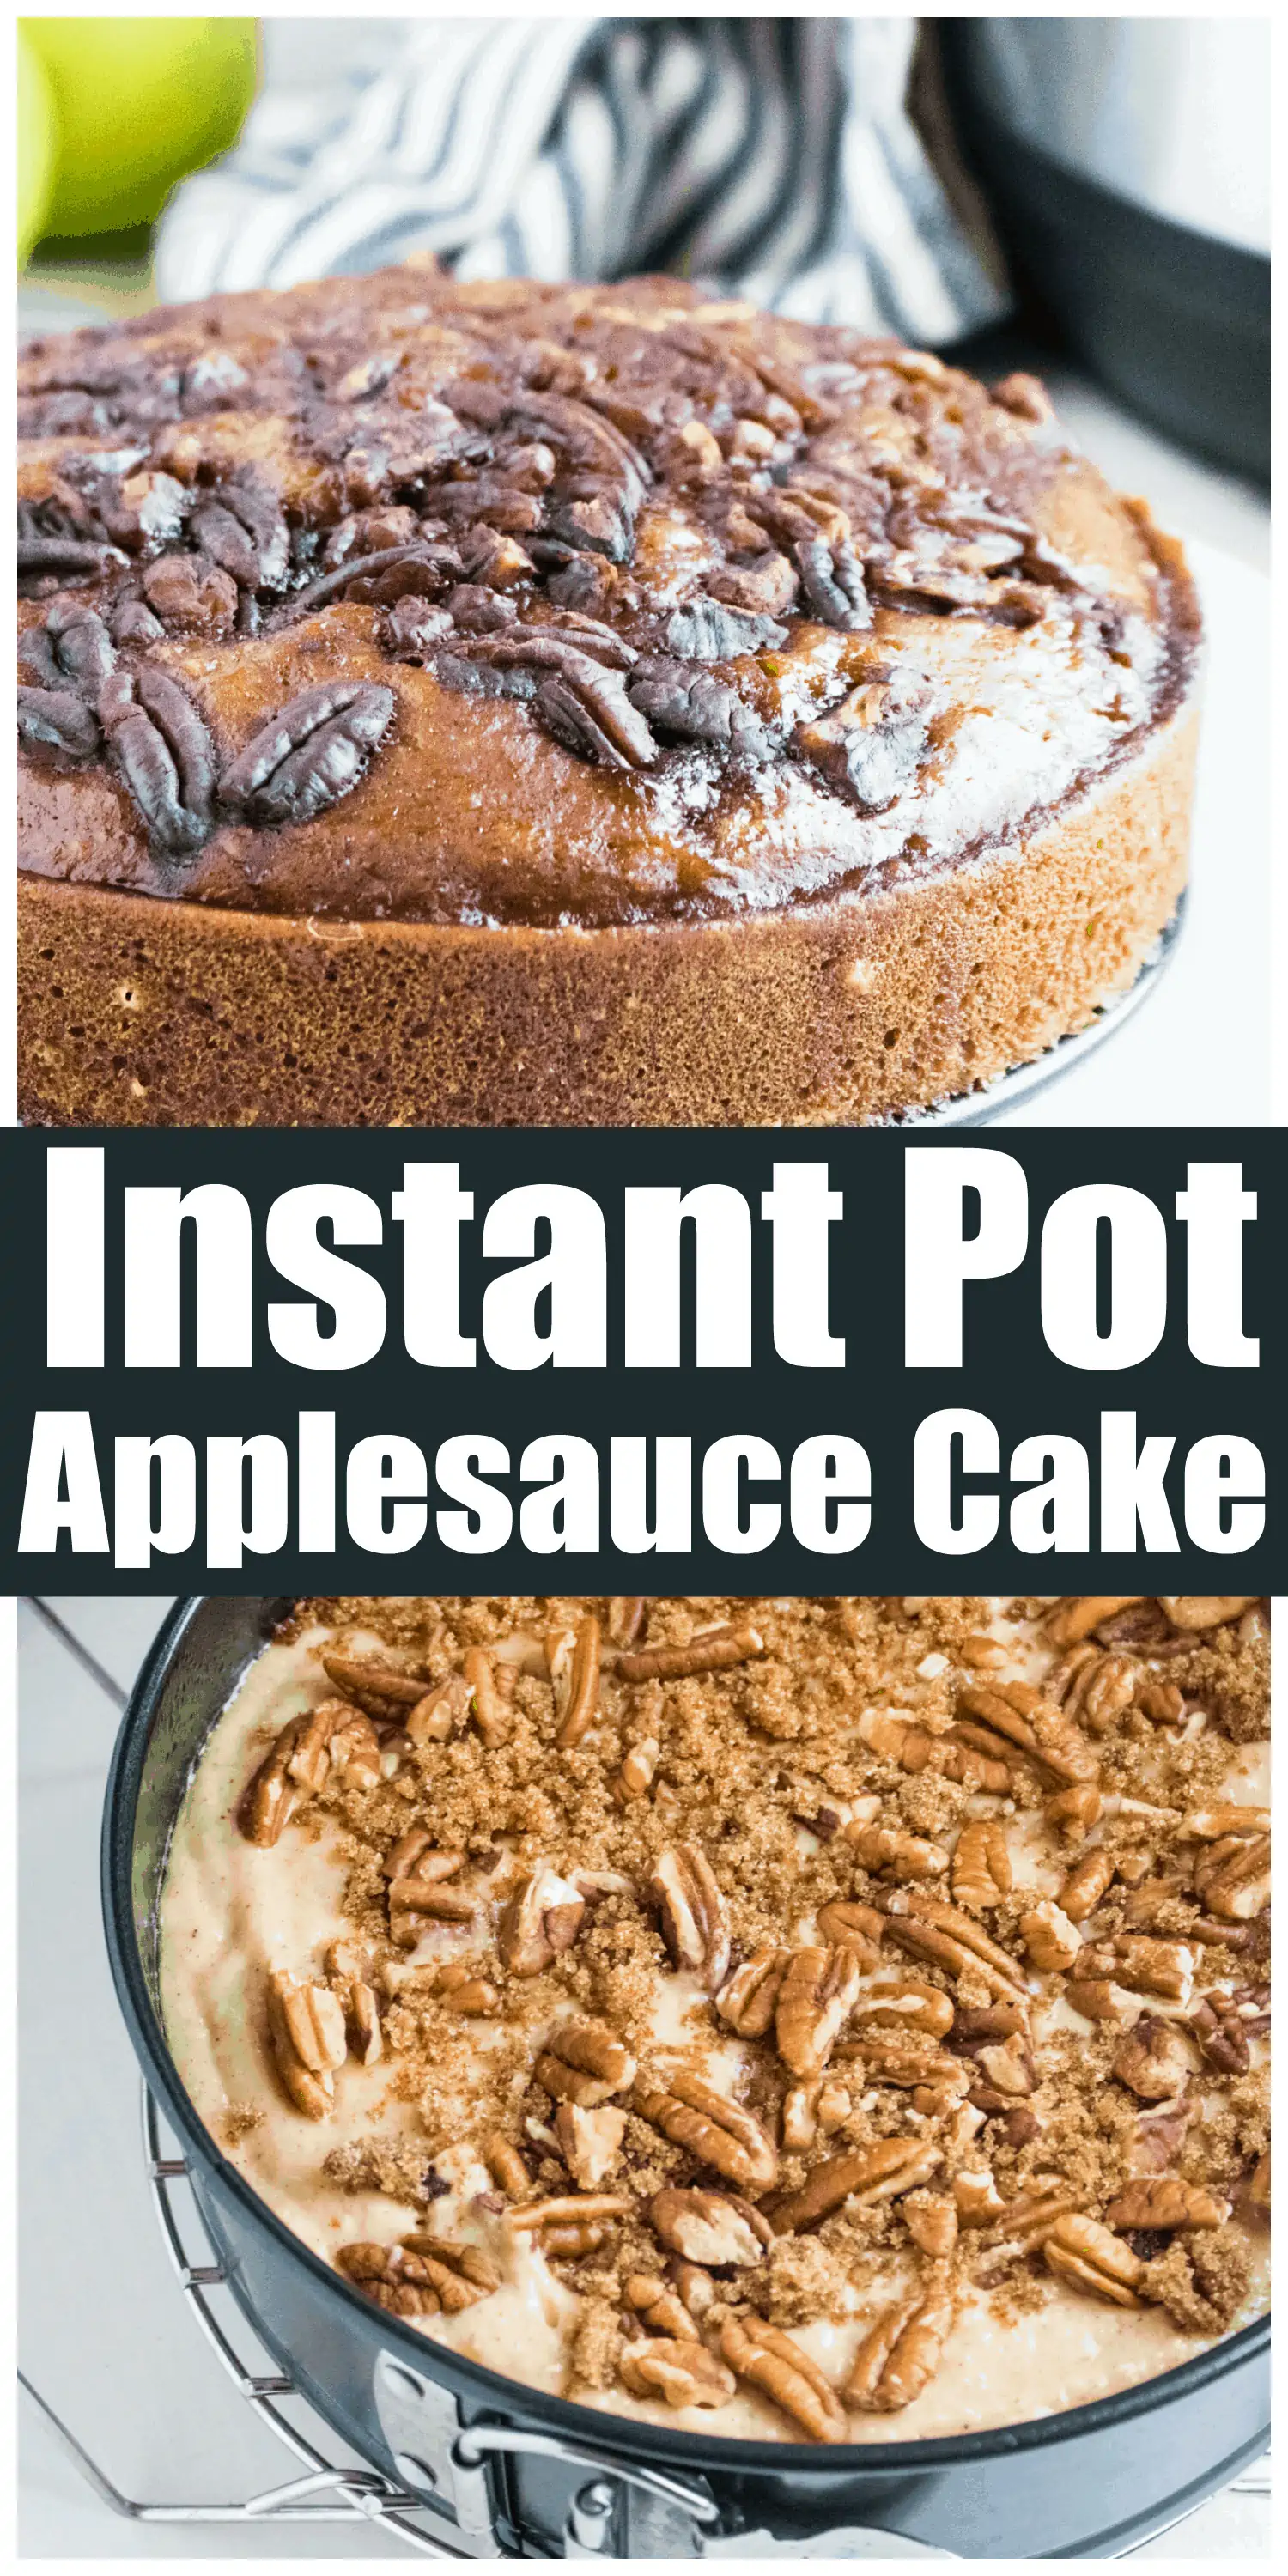 Instant Pot Old Fashioned Applesauce Cake